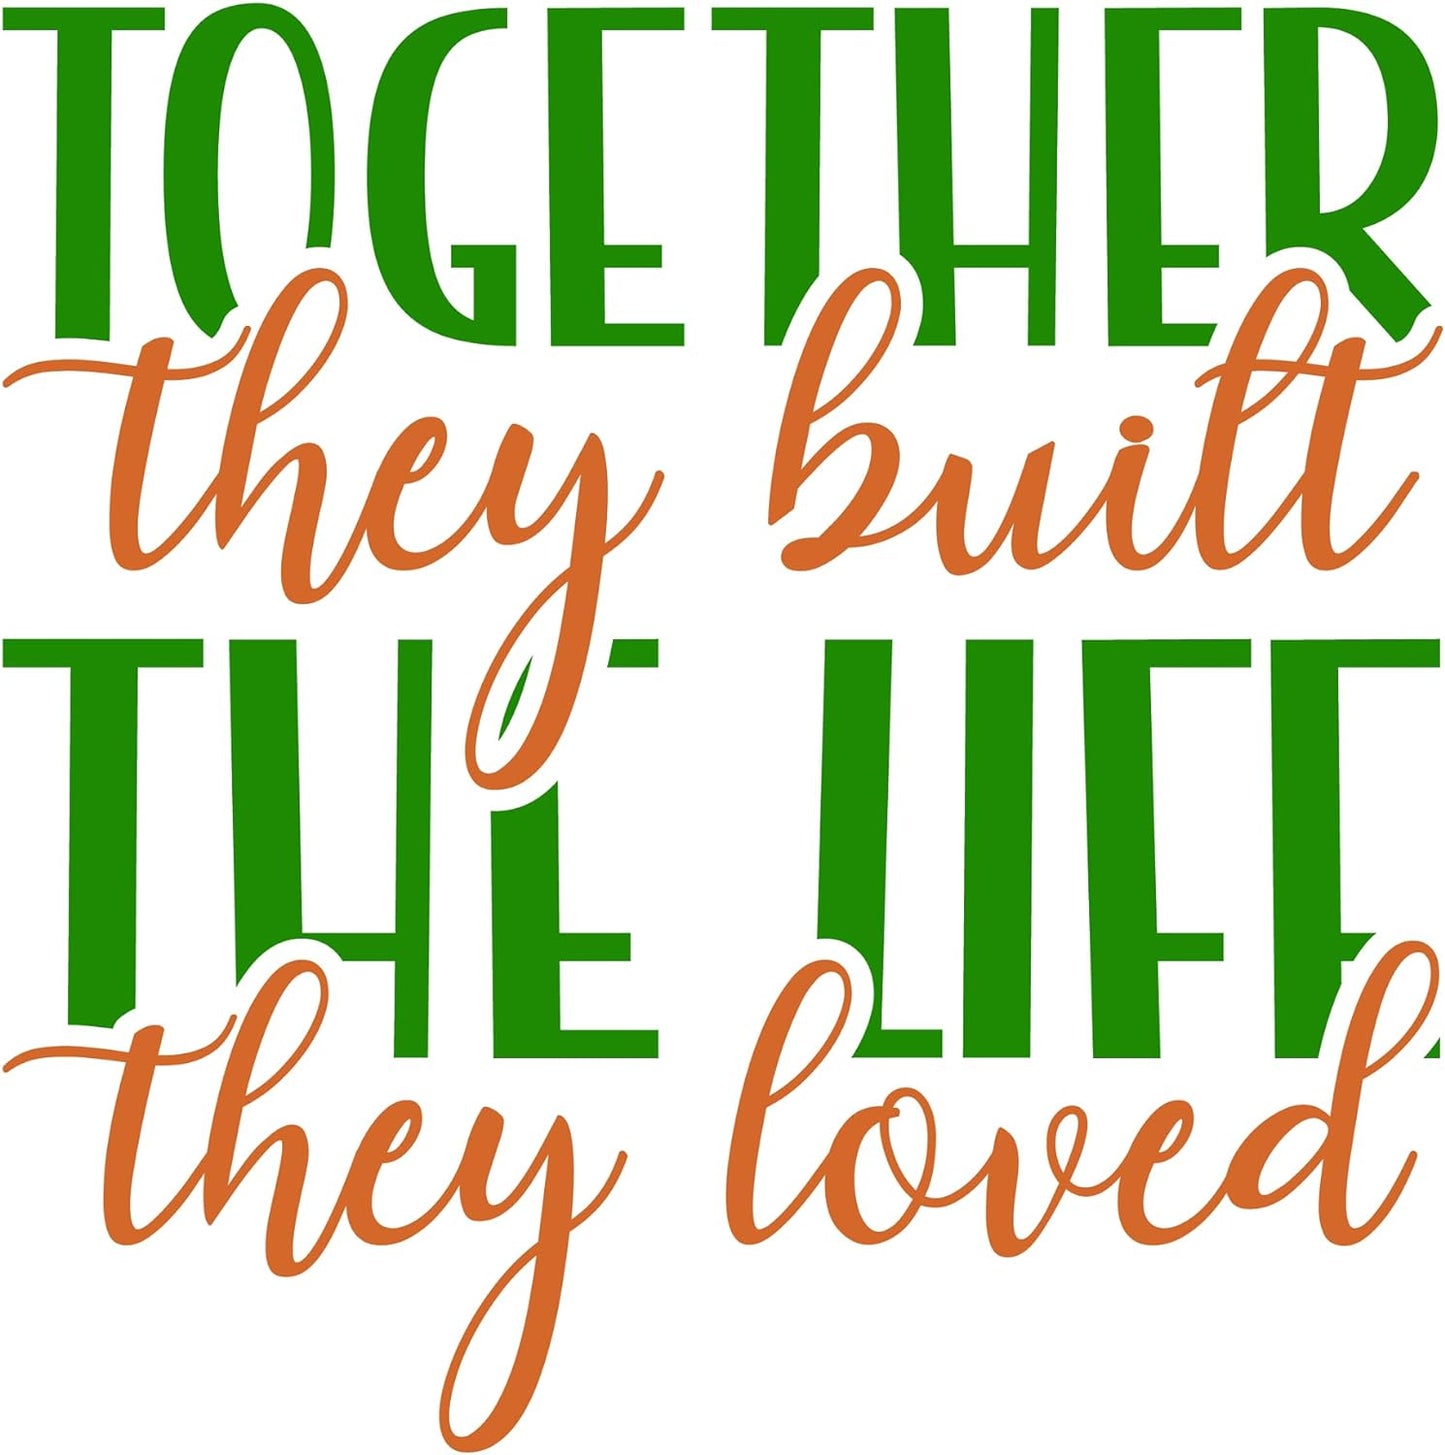 Inspirational Quote "Together They Built a Life Loved" Motivational Sticker Vinyl Decal Motivation Stickers- 5" Vinyl Sticker Waterproof